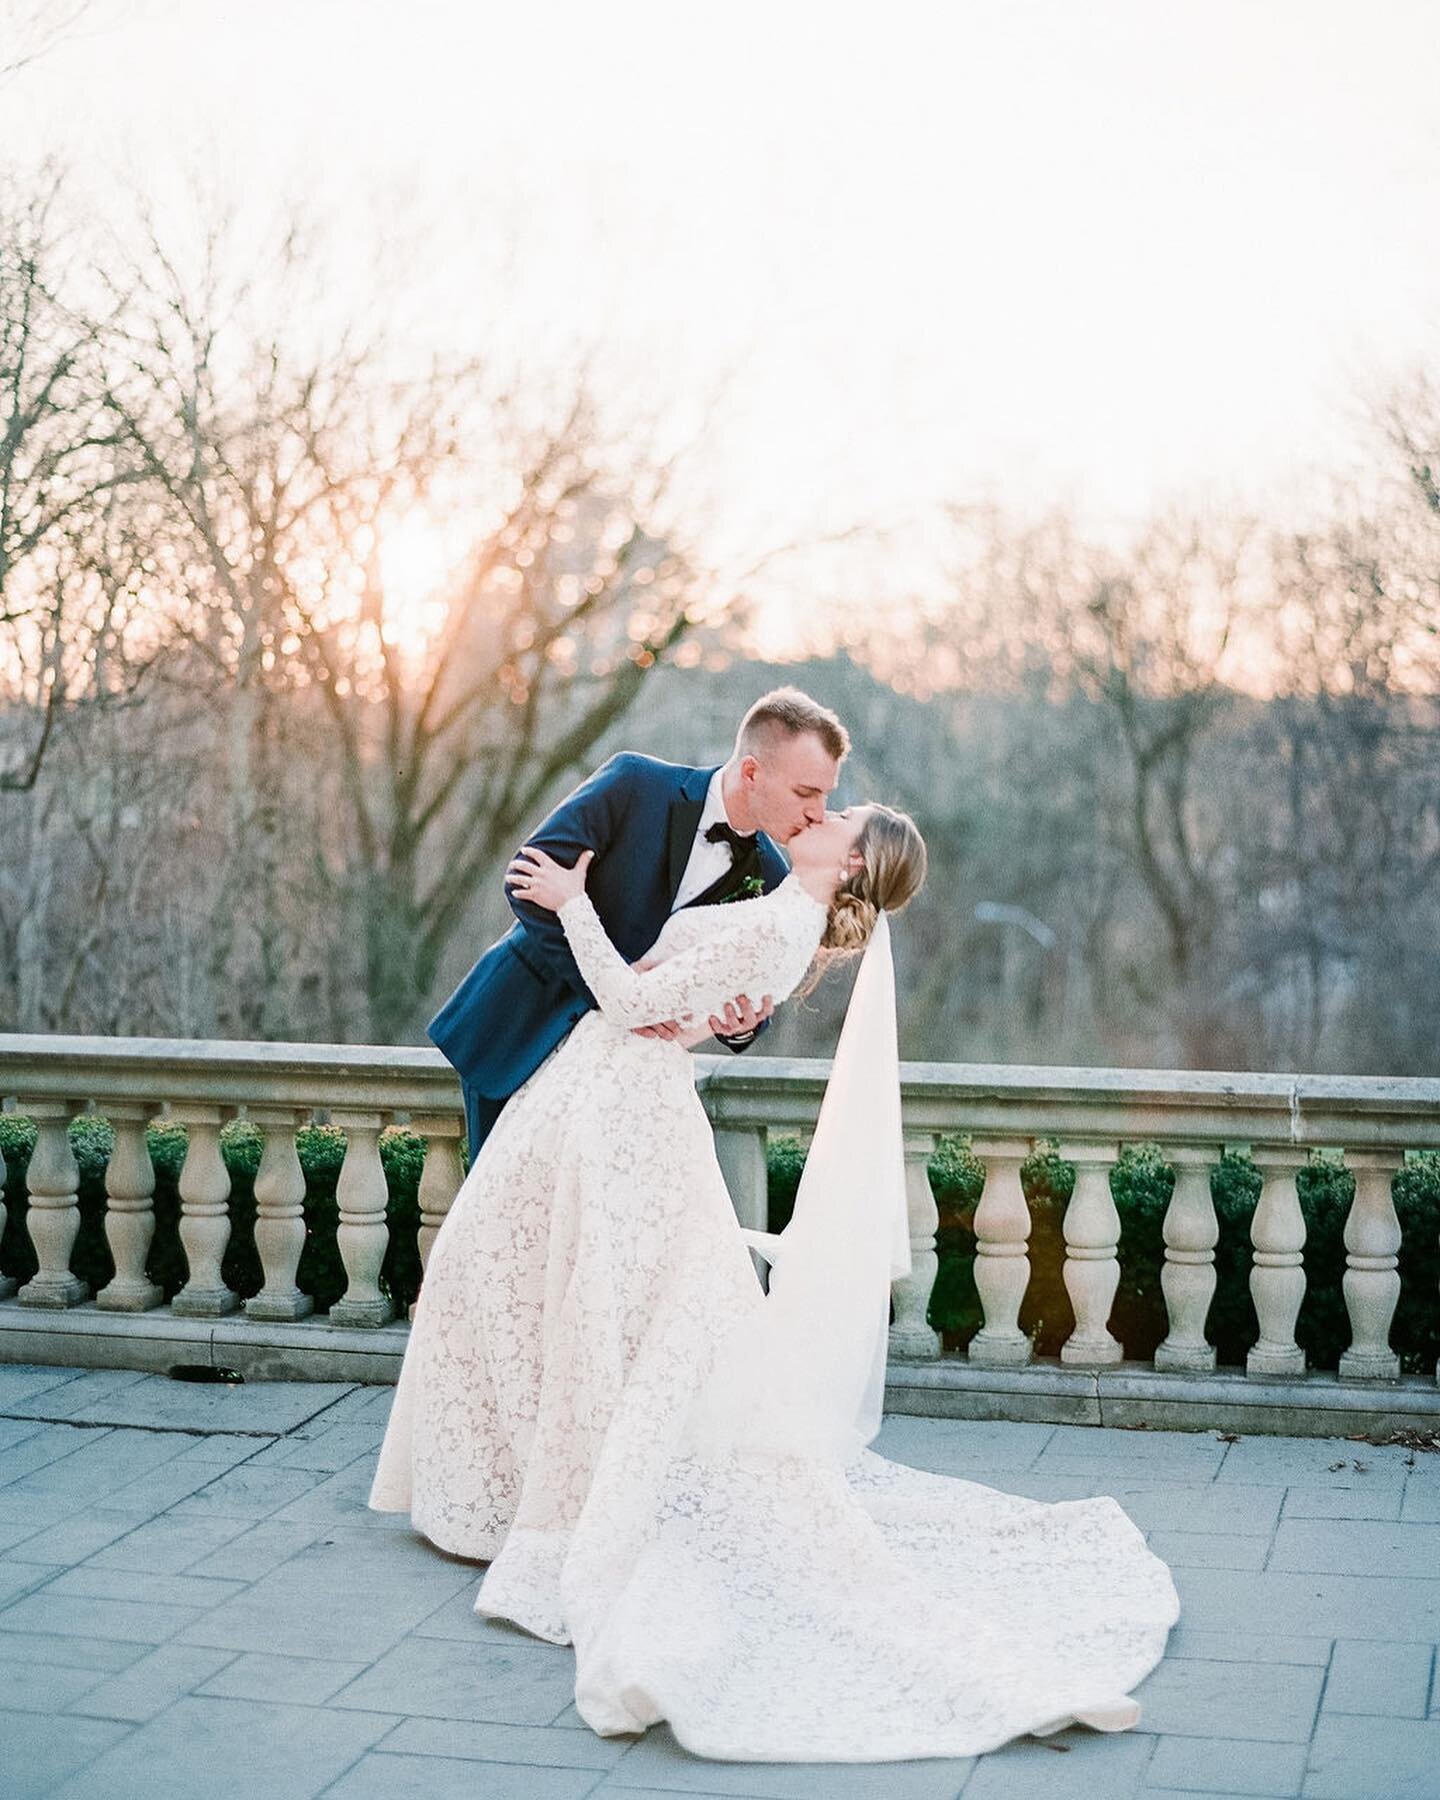 D R E A M Y 

The fabulous @kristen_bowen_photography captured Melissa &amp; Matt&rsquo;s day so beautifully. I absolutely love it when photographers use film to create dreamy images like these ✨

Vendor dream team:
Venue: @laurelhallindy 
Coordinati